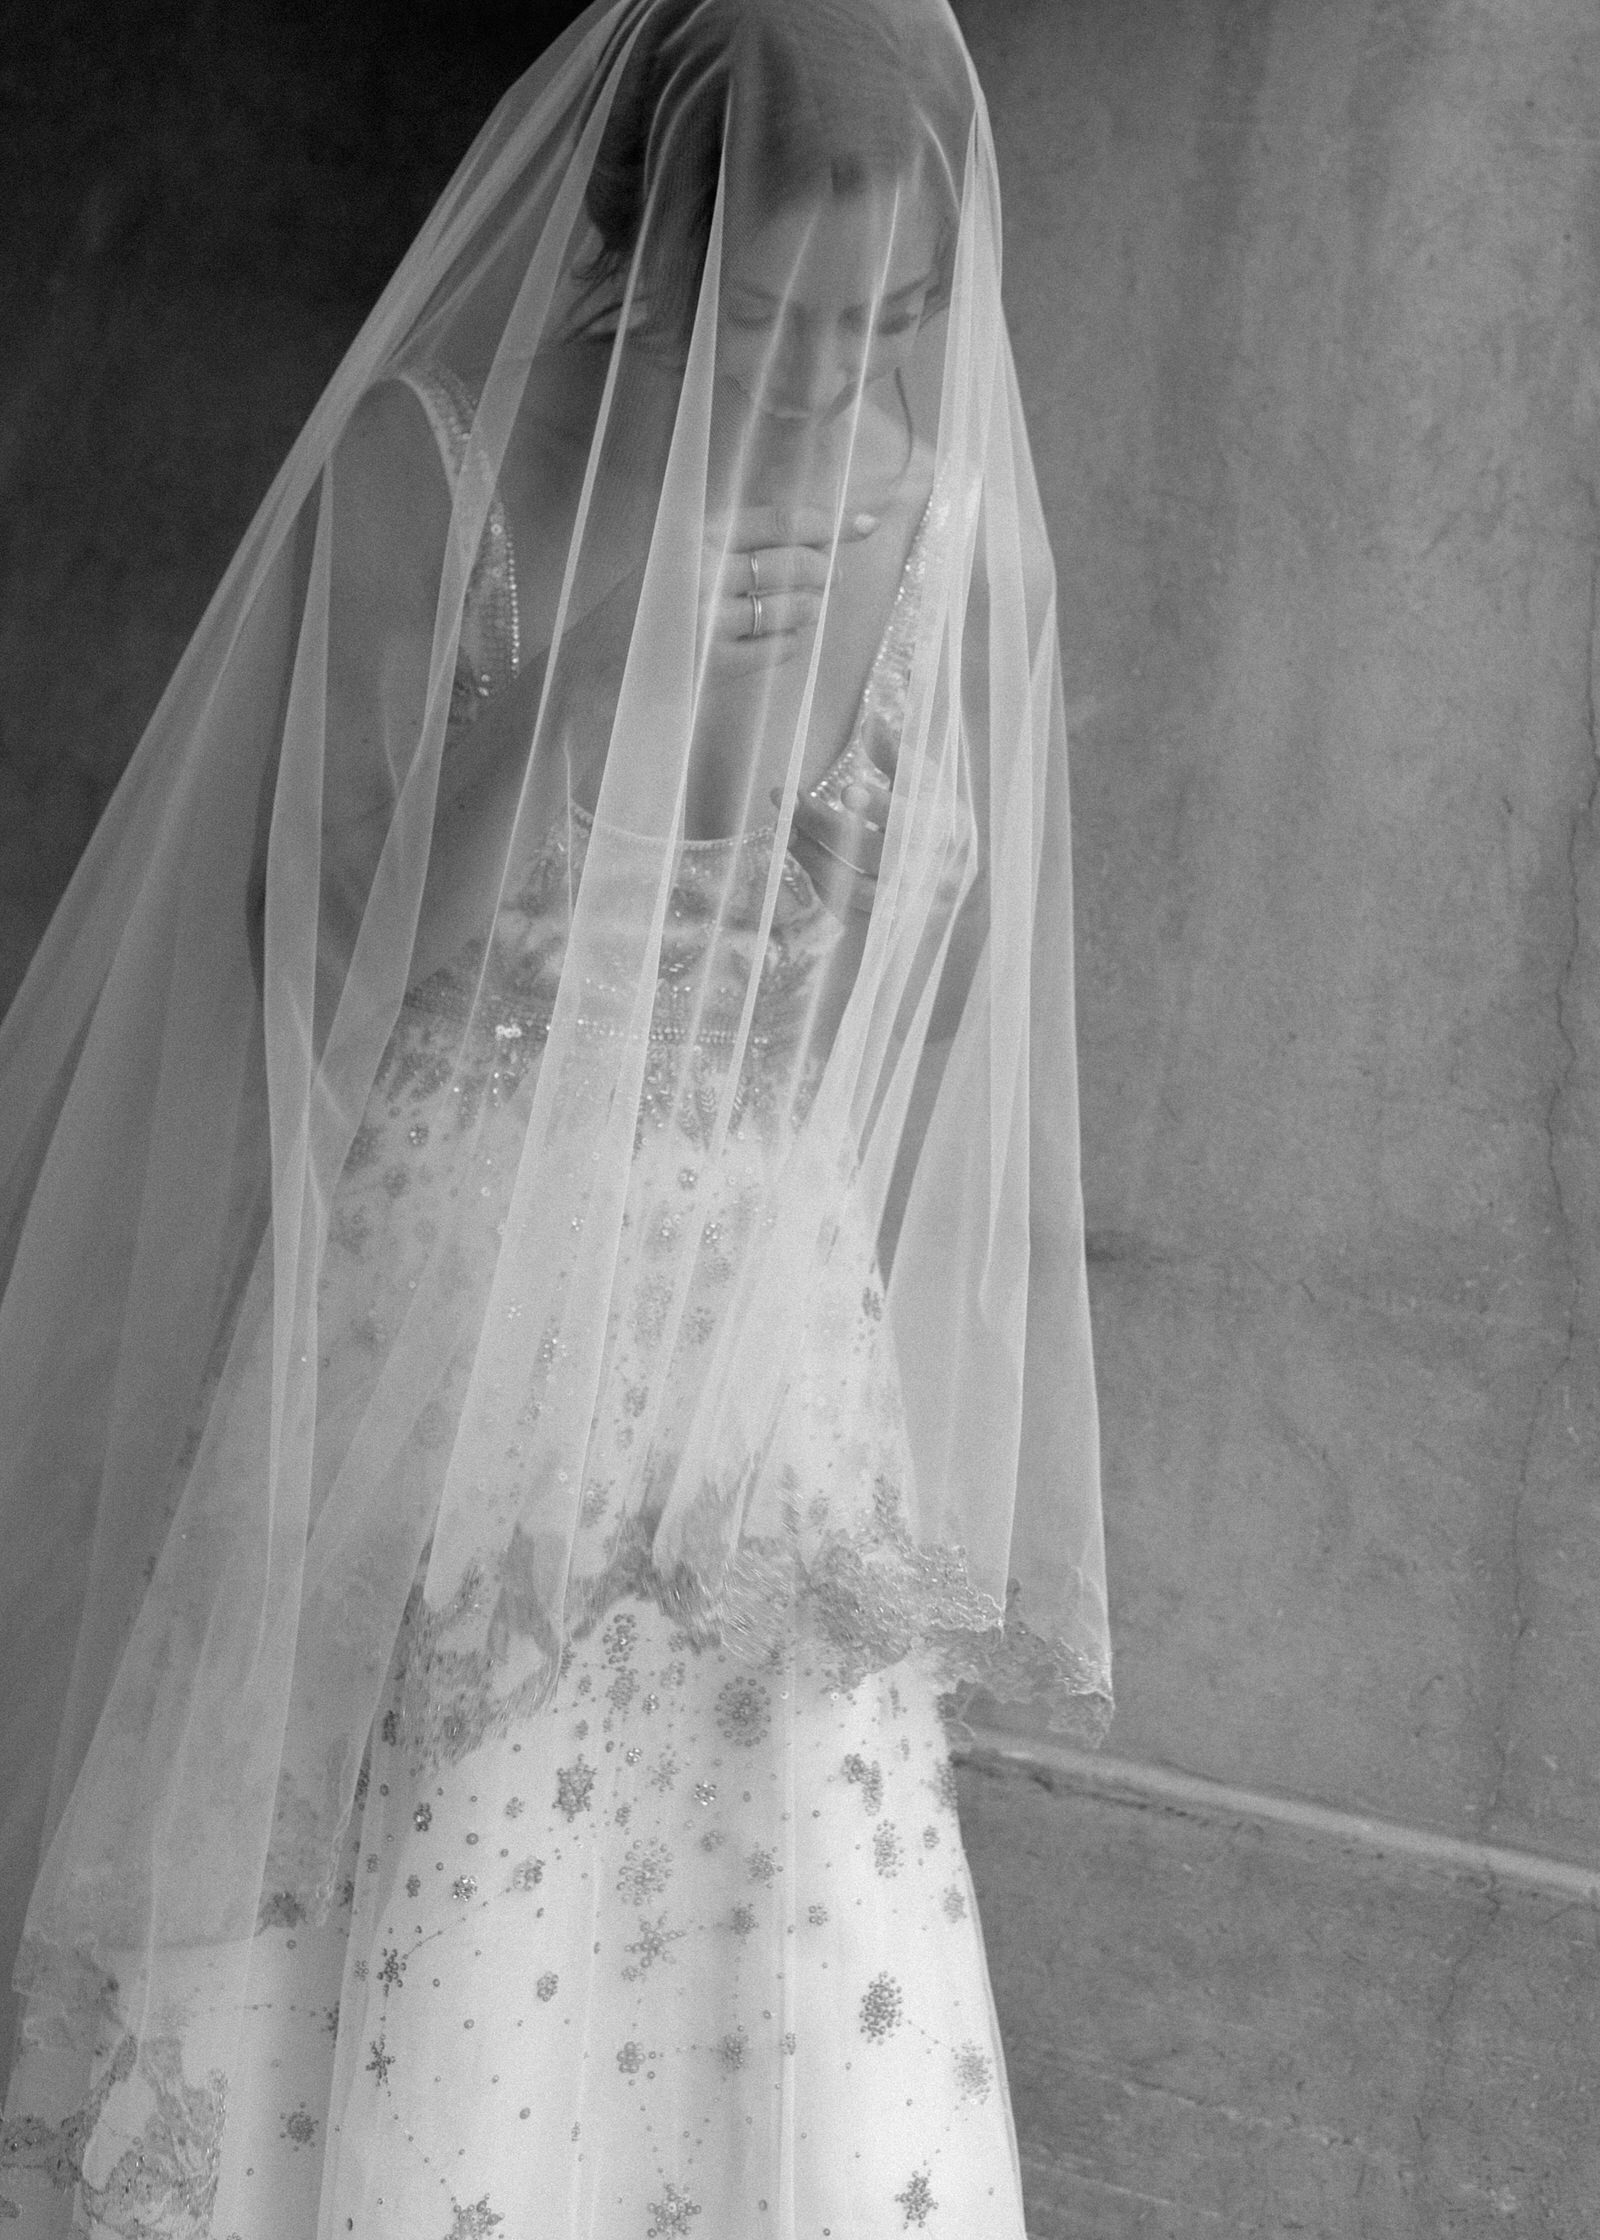 Jessica Stroup Wed in Marrakech Wearing a Monvieve Veil That Was Made ...